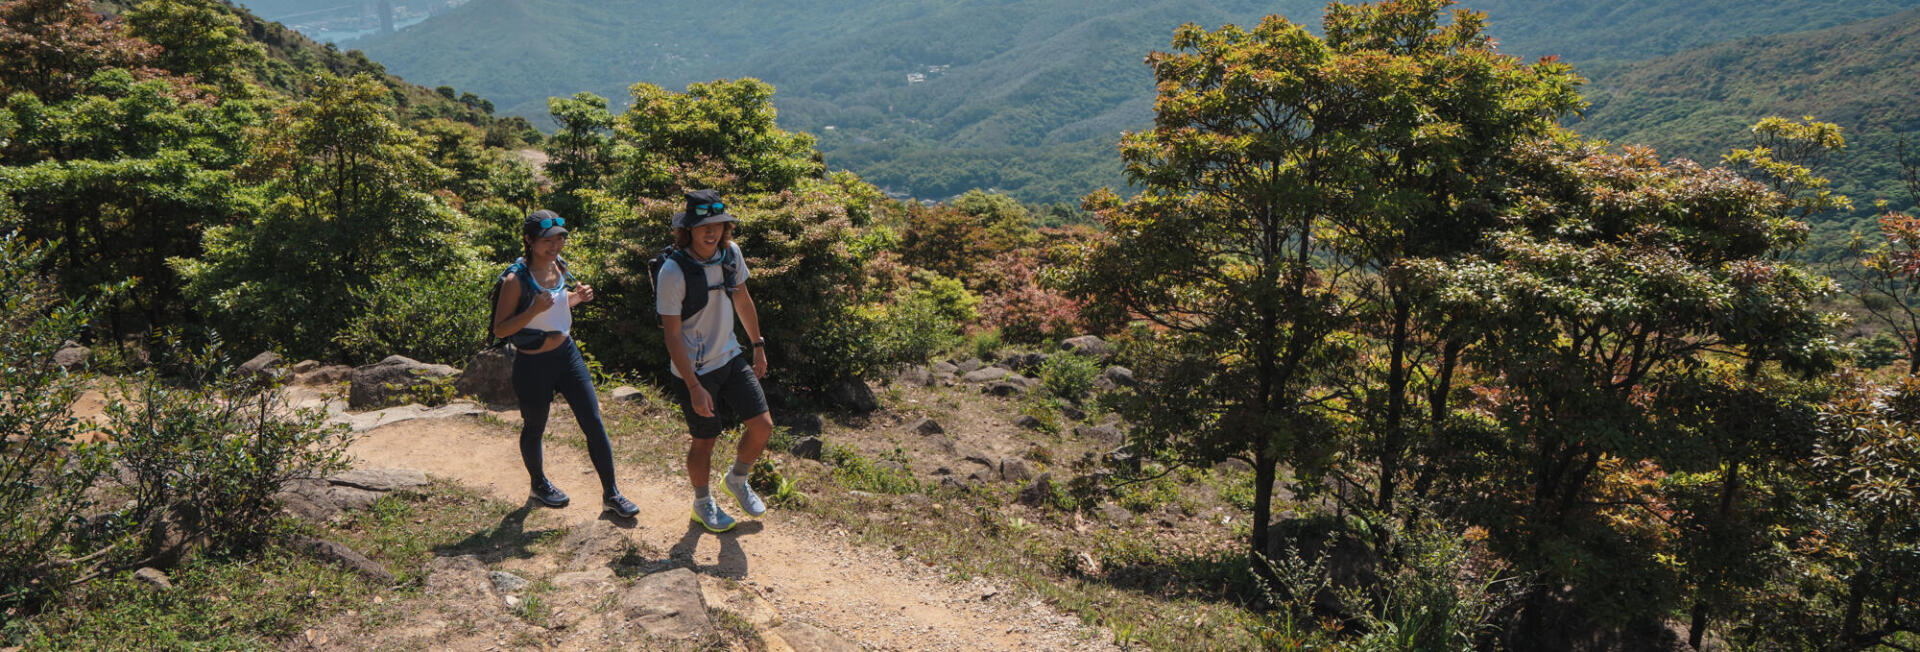 leave no trace while hiking - Decathlon